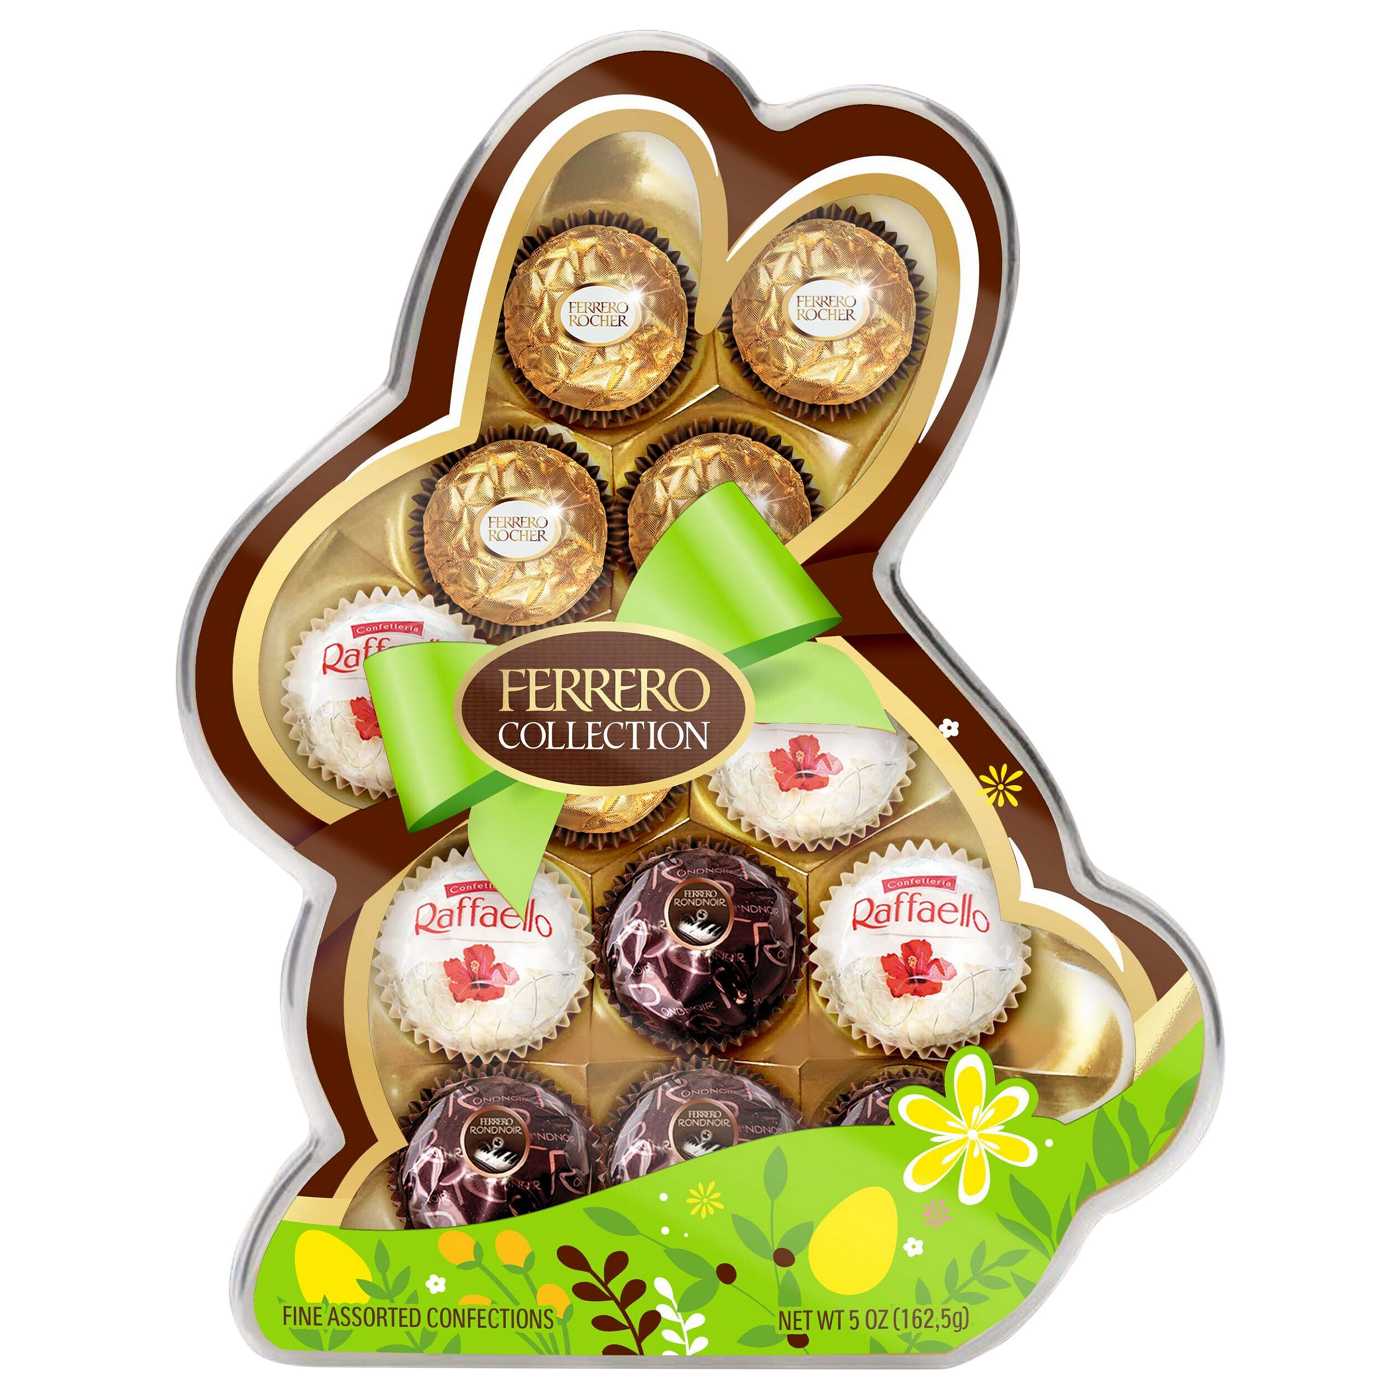 Ferrero Collection Fine Assorted Confections Easter Bunny Gift Box, 13 Pc; image 1 of 2